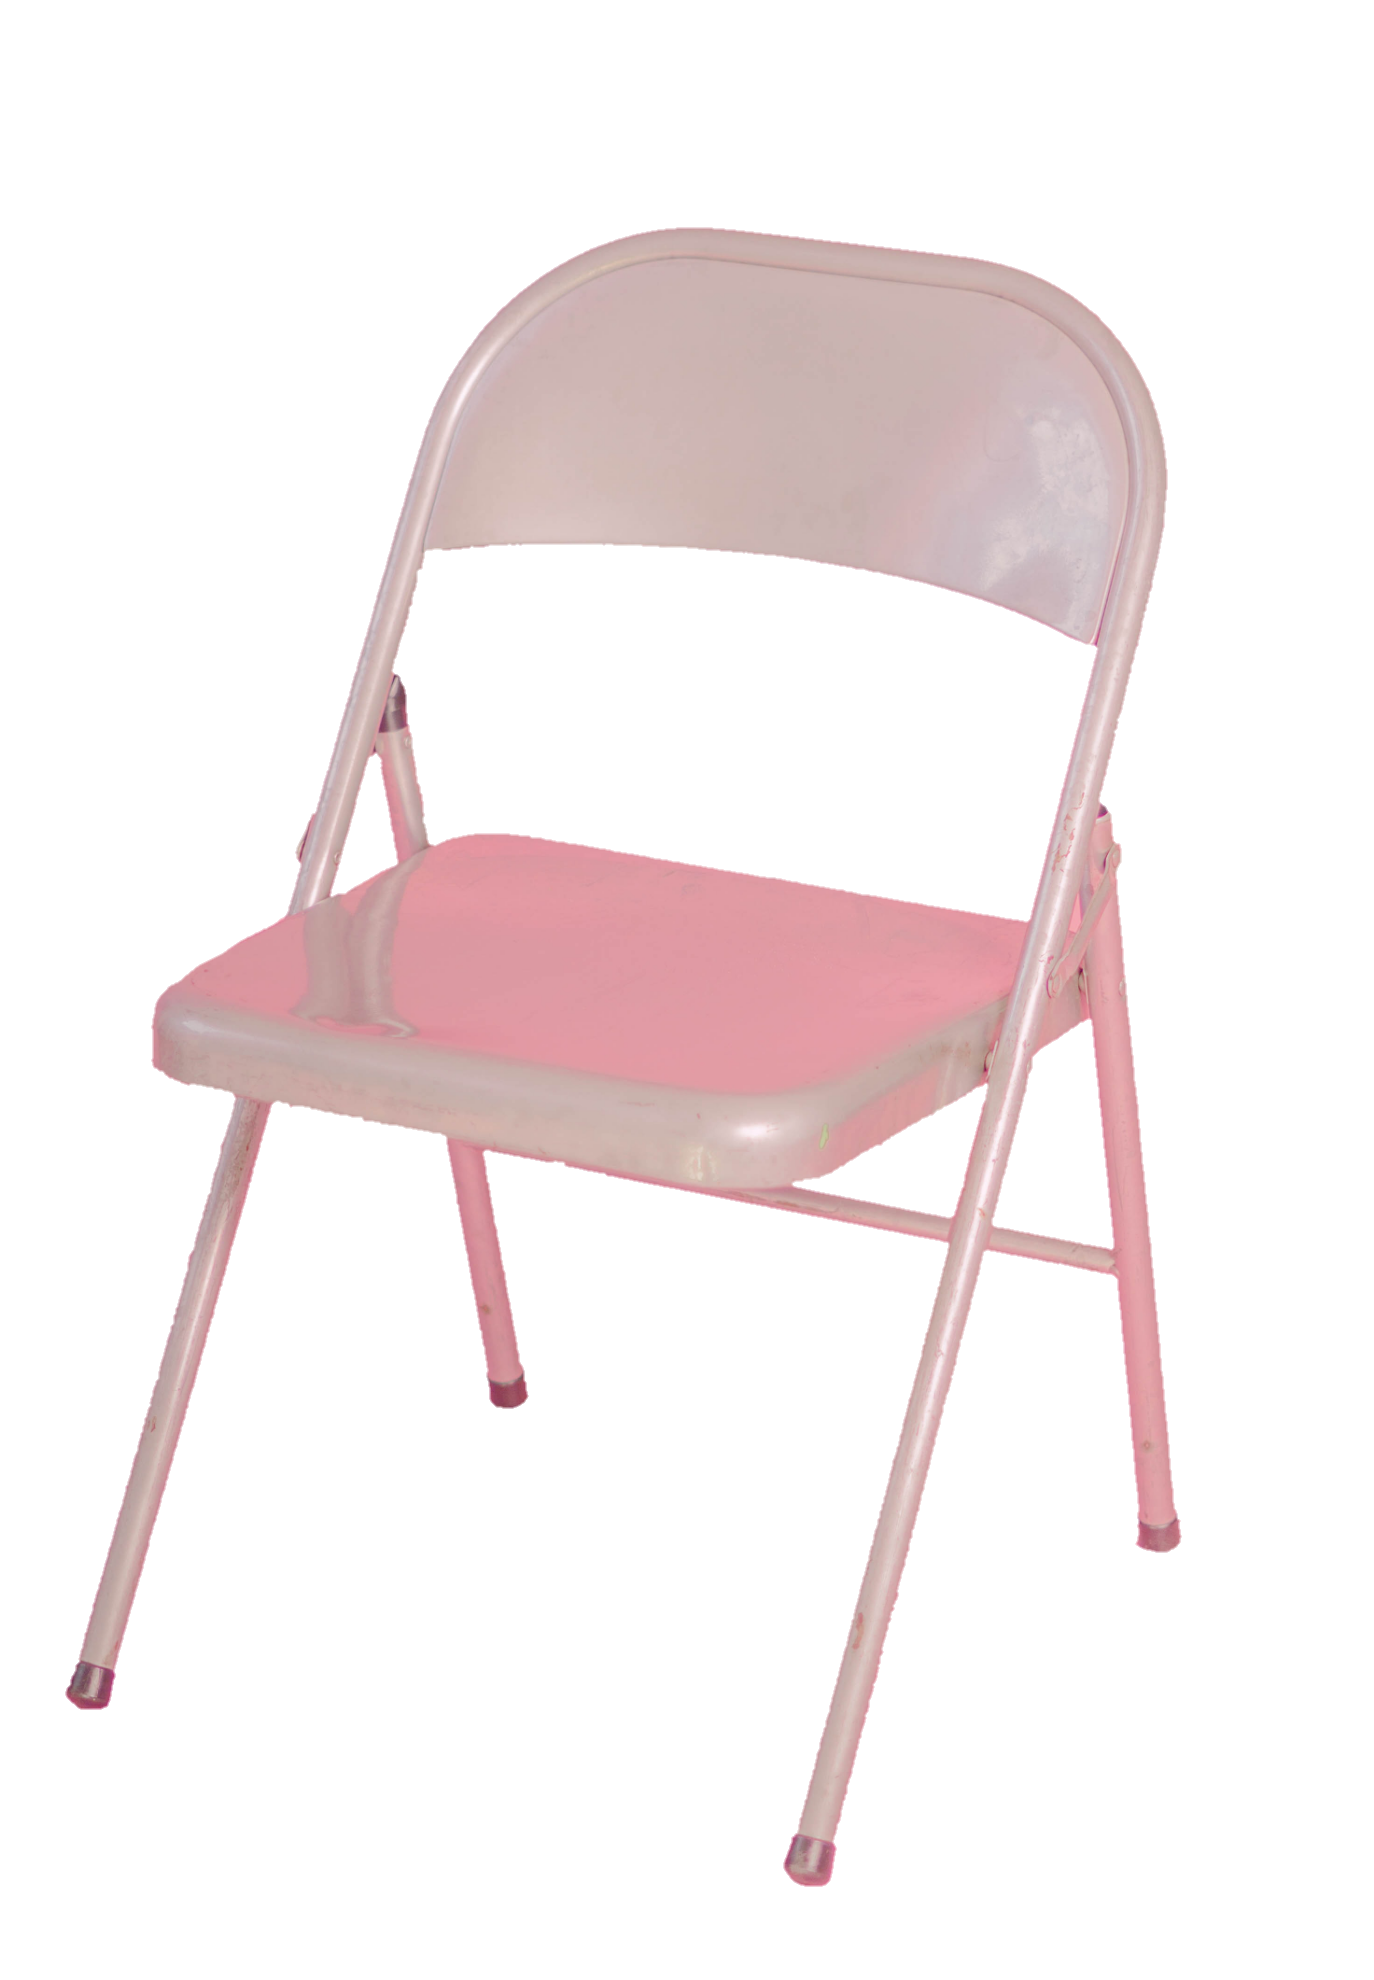 chair-png-image-pngfre-19